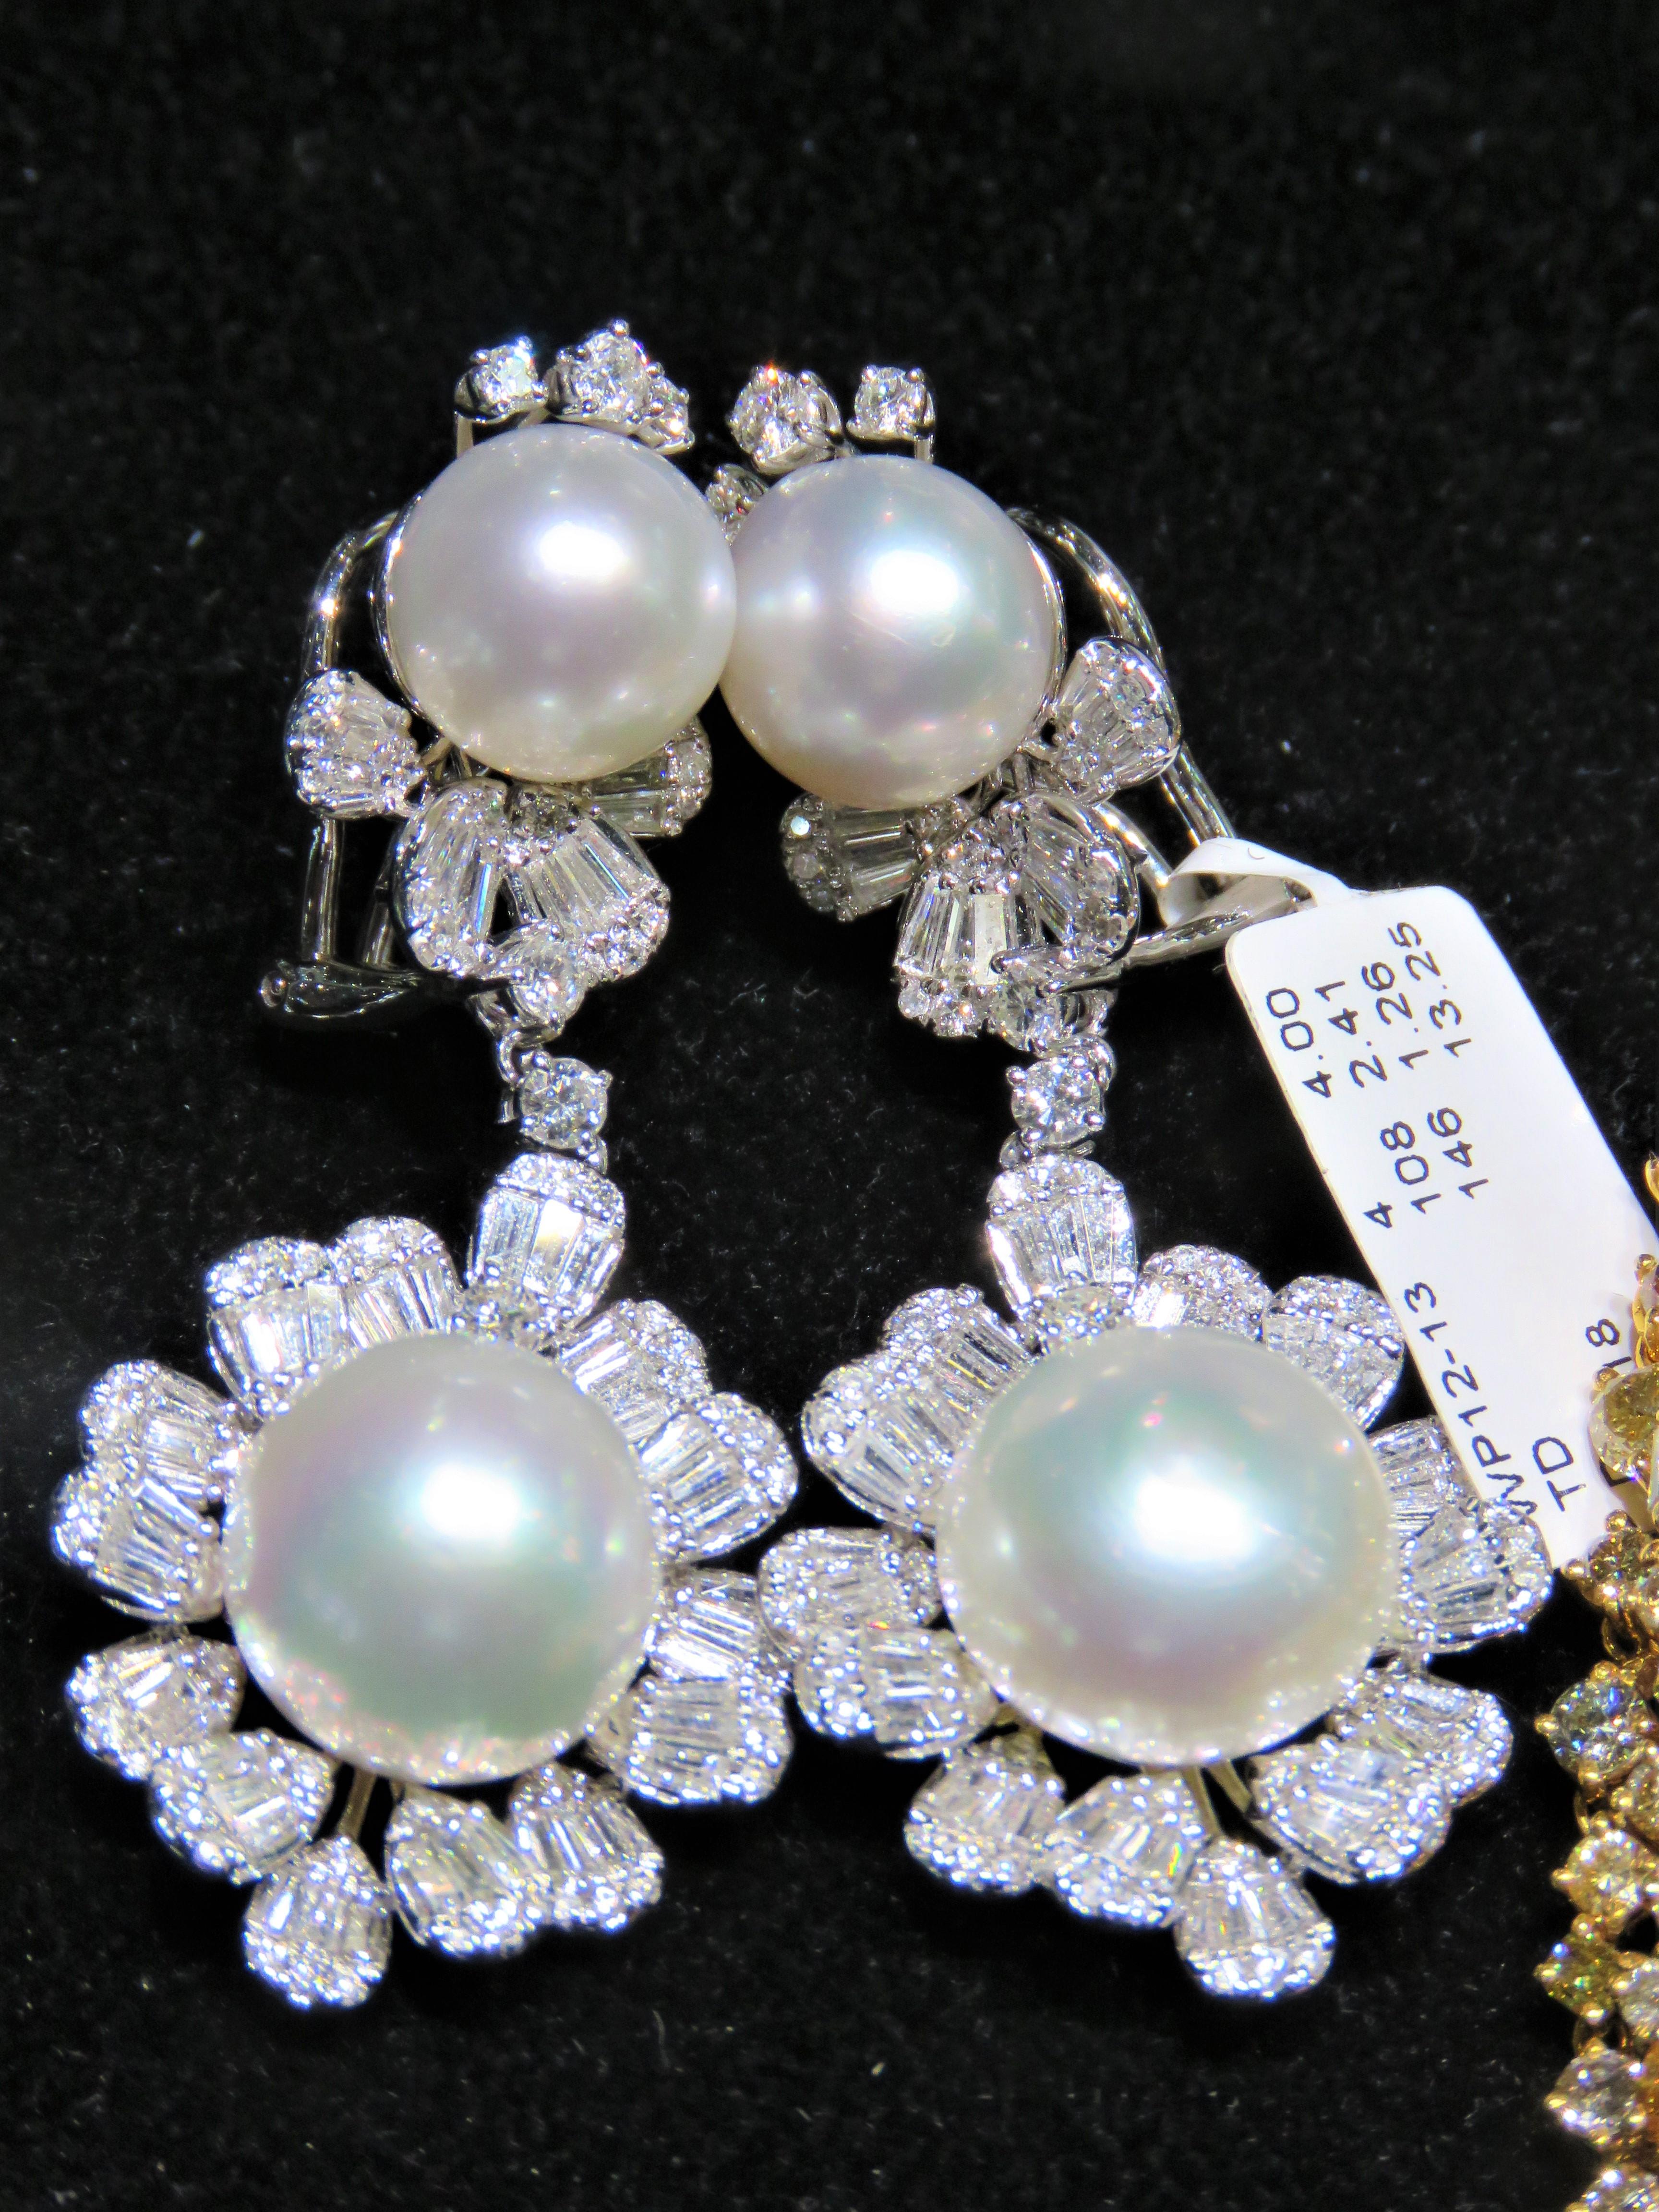 The Following Item we are offering is this Extremely Rare Beautiful 18KT Gold Fine Rare Large South Sea Pearl Fancy Diamond Floral Earrings. These Magnificent Earrings are comprised of Rare Fine Large South Sea Pearls with Gorgeous Glittering